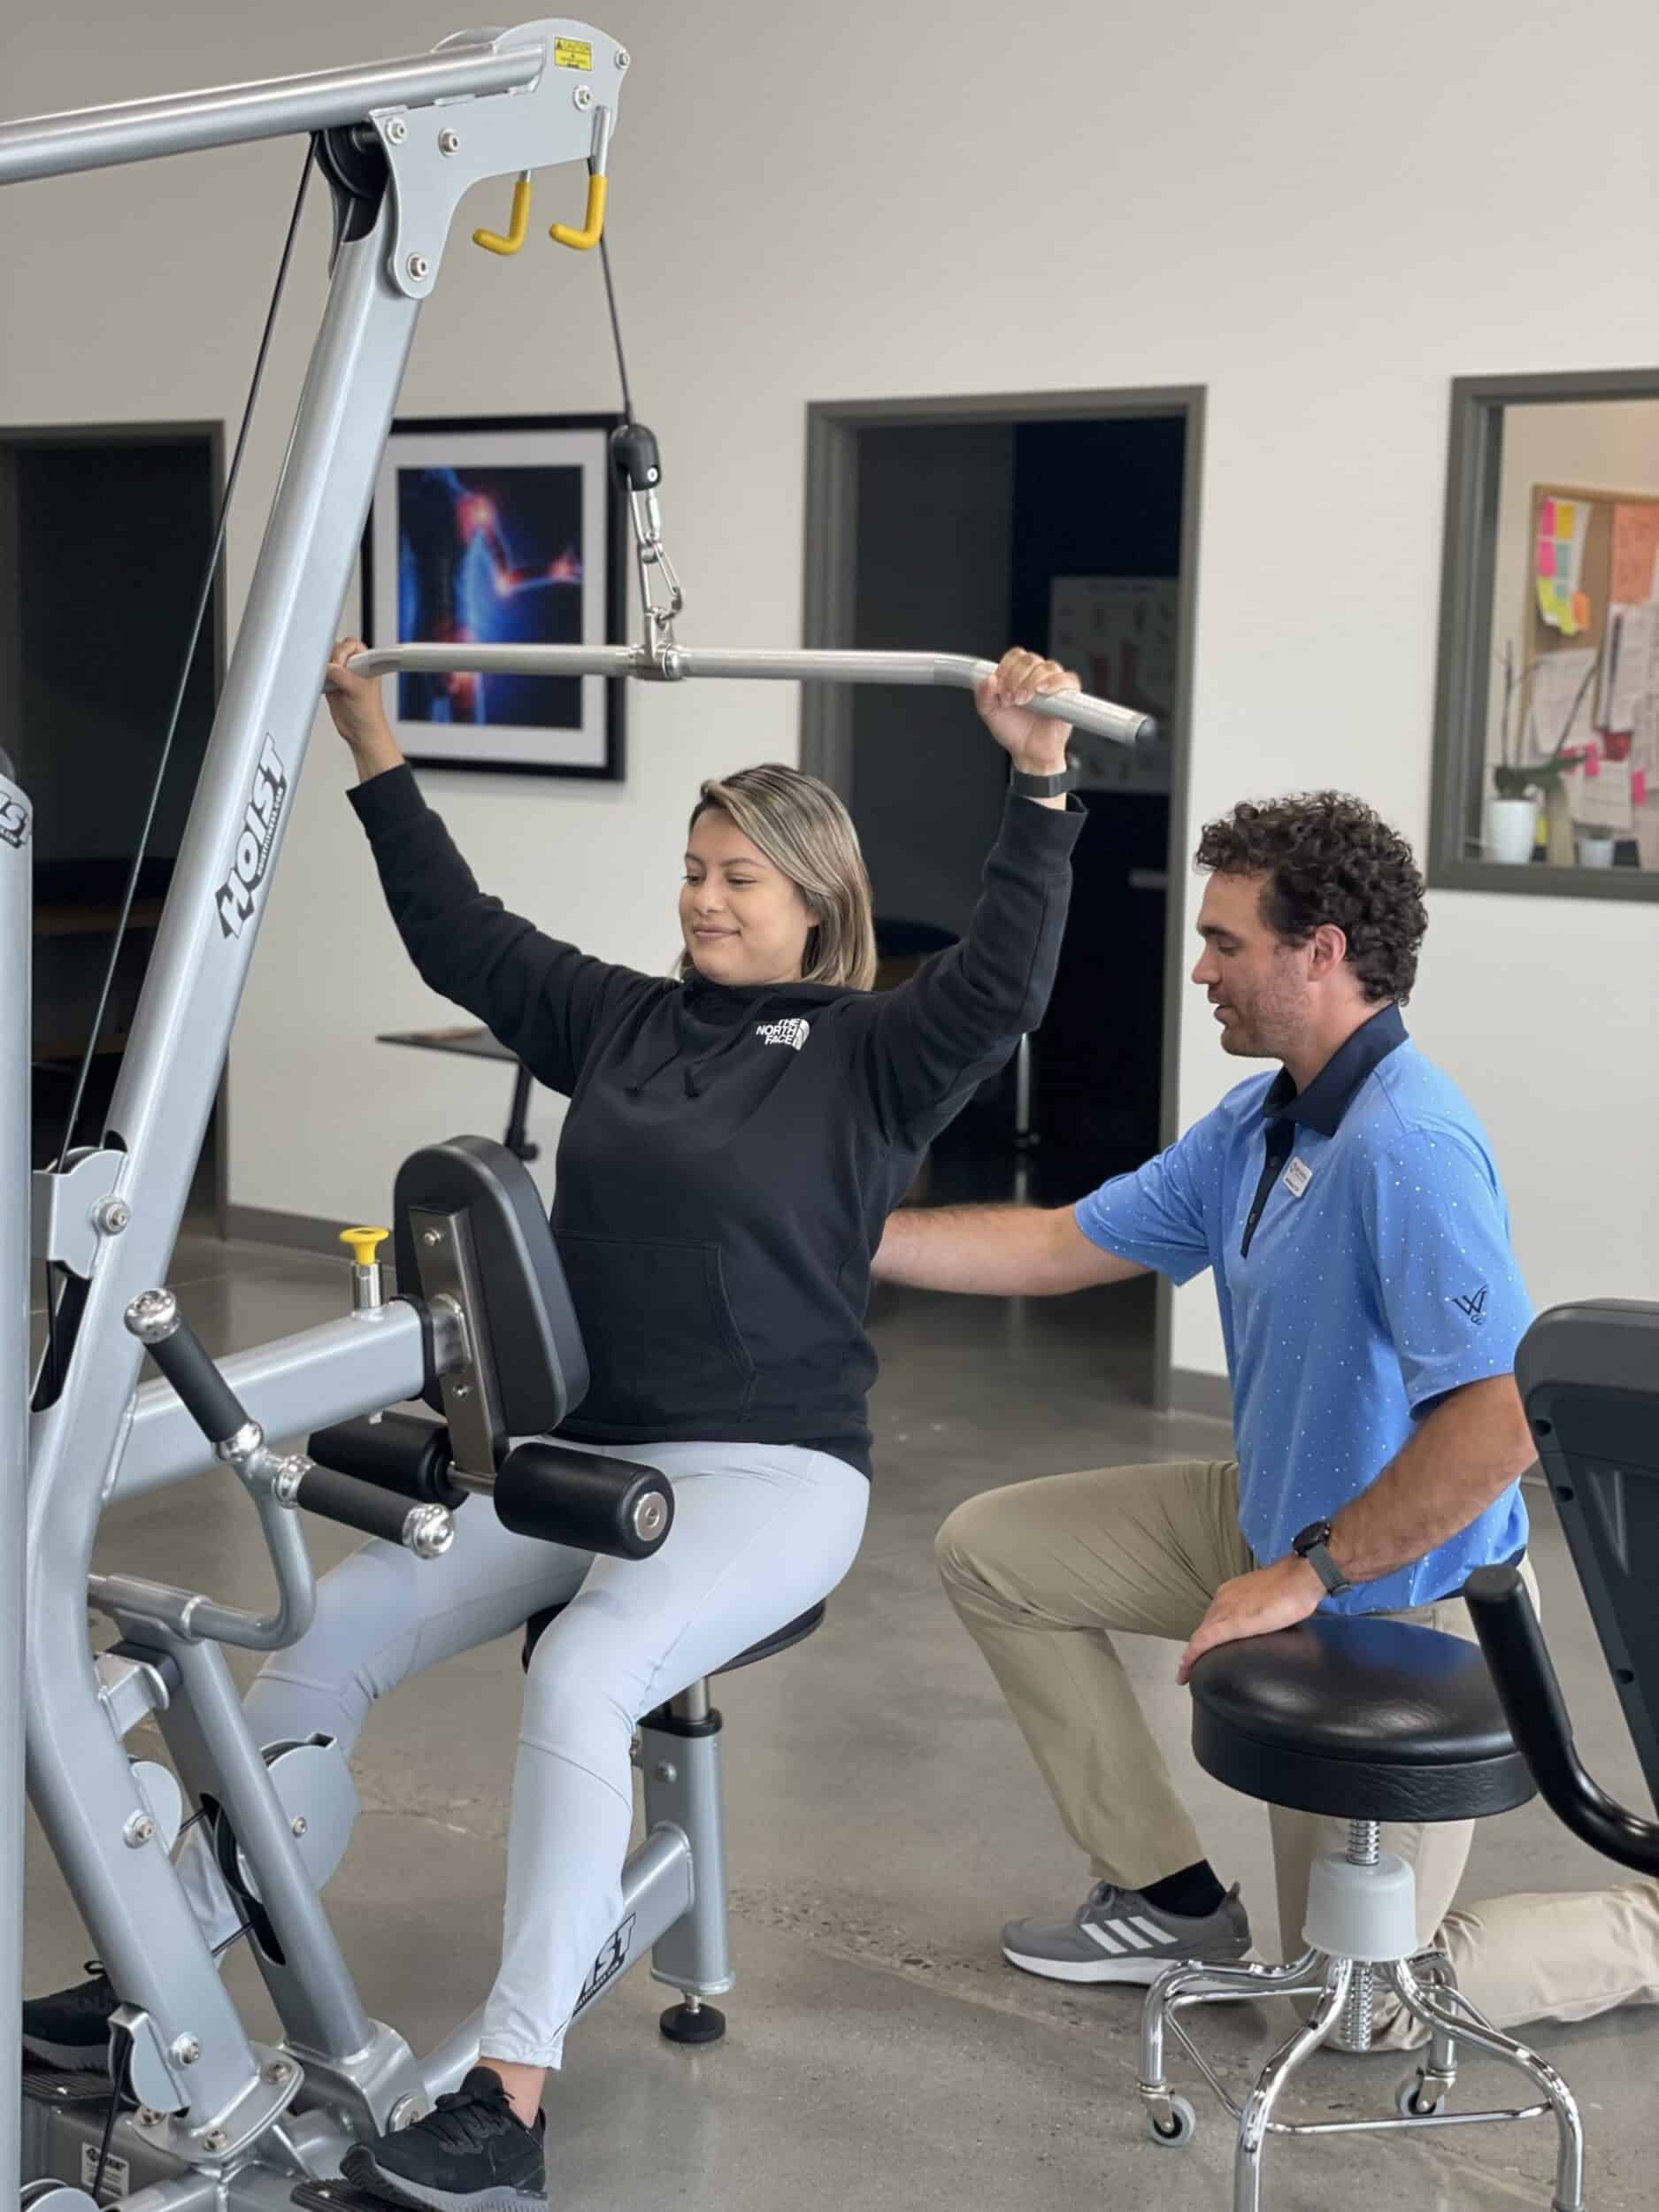 woman undergoing physical therapy on weight pull-down machine